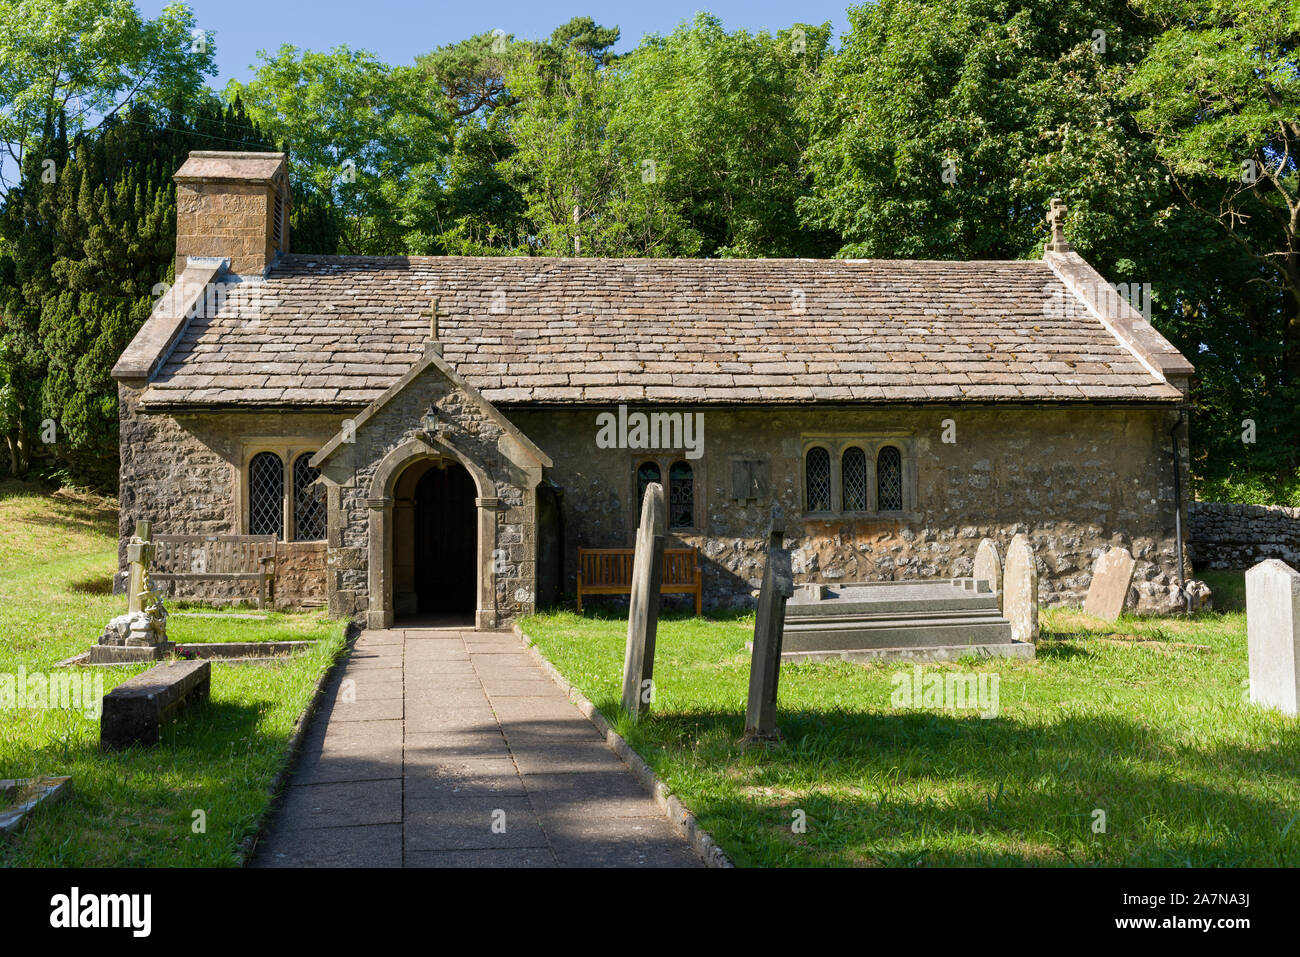 St Leonards Church in the hamlet of Chapel-le-Dale in the Yorkshire Dales National Park, North Yorkshire, England. Stock Photo